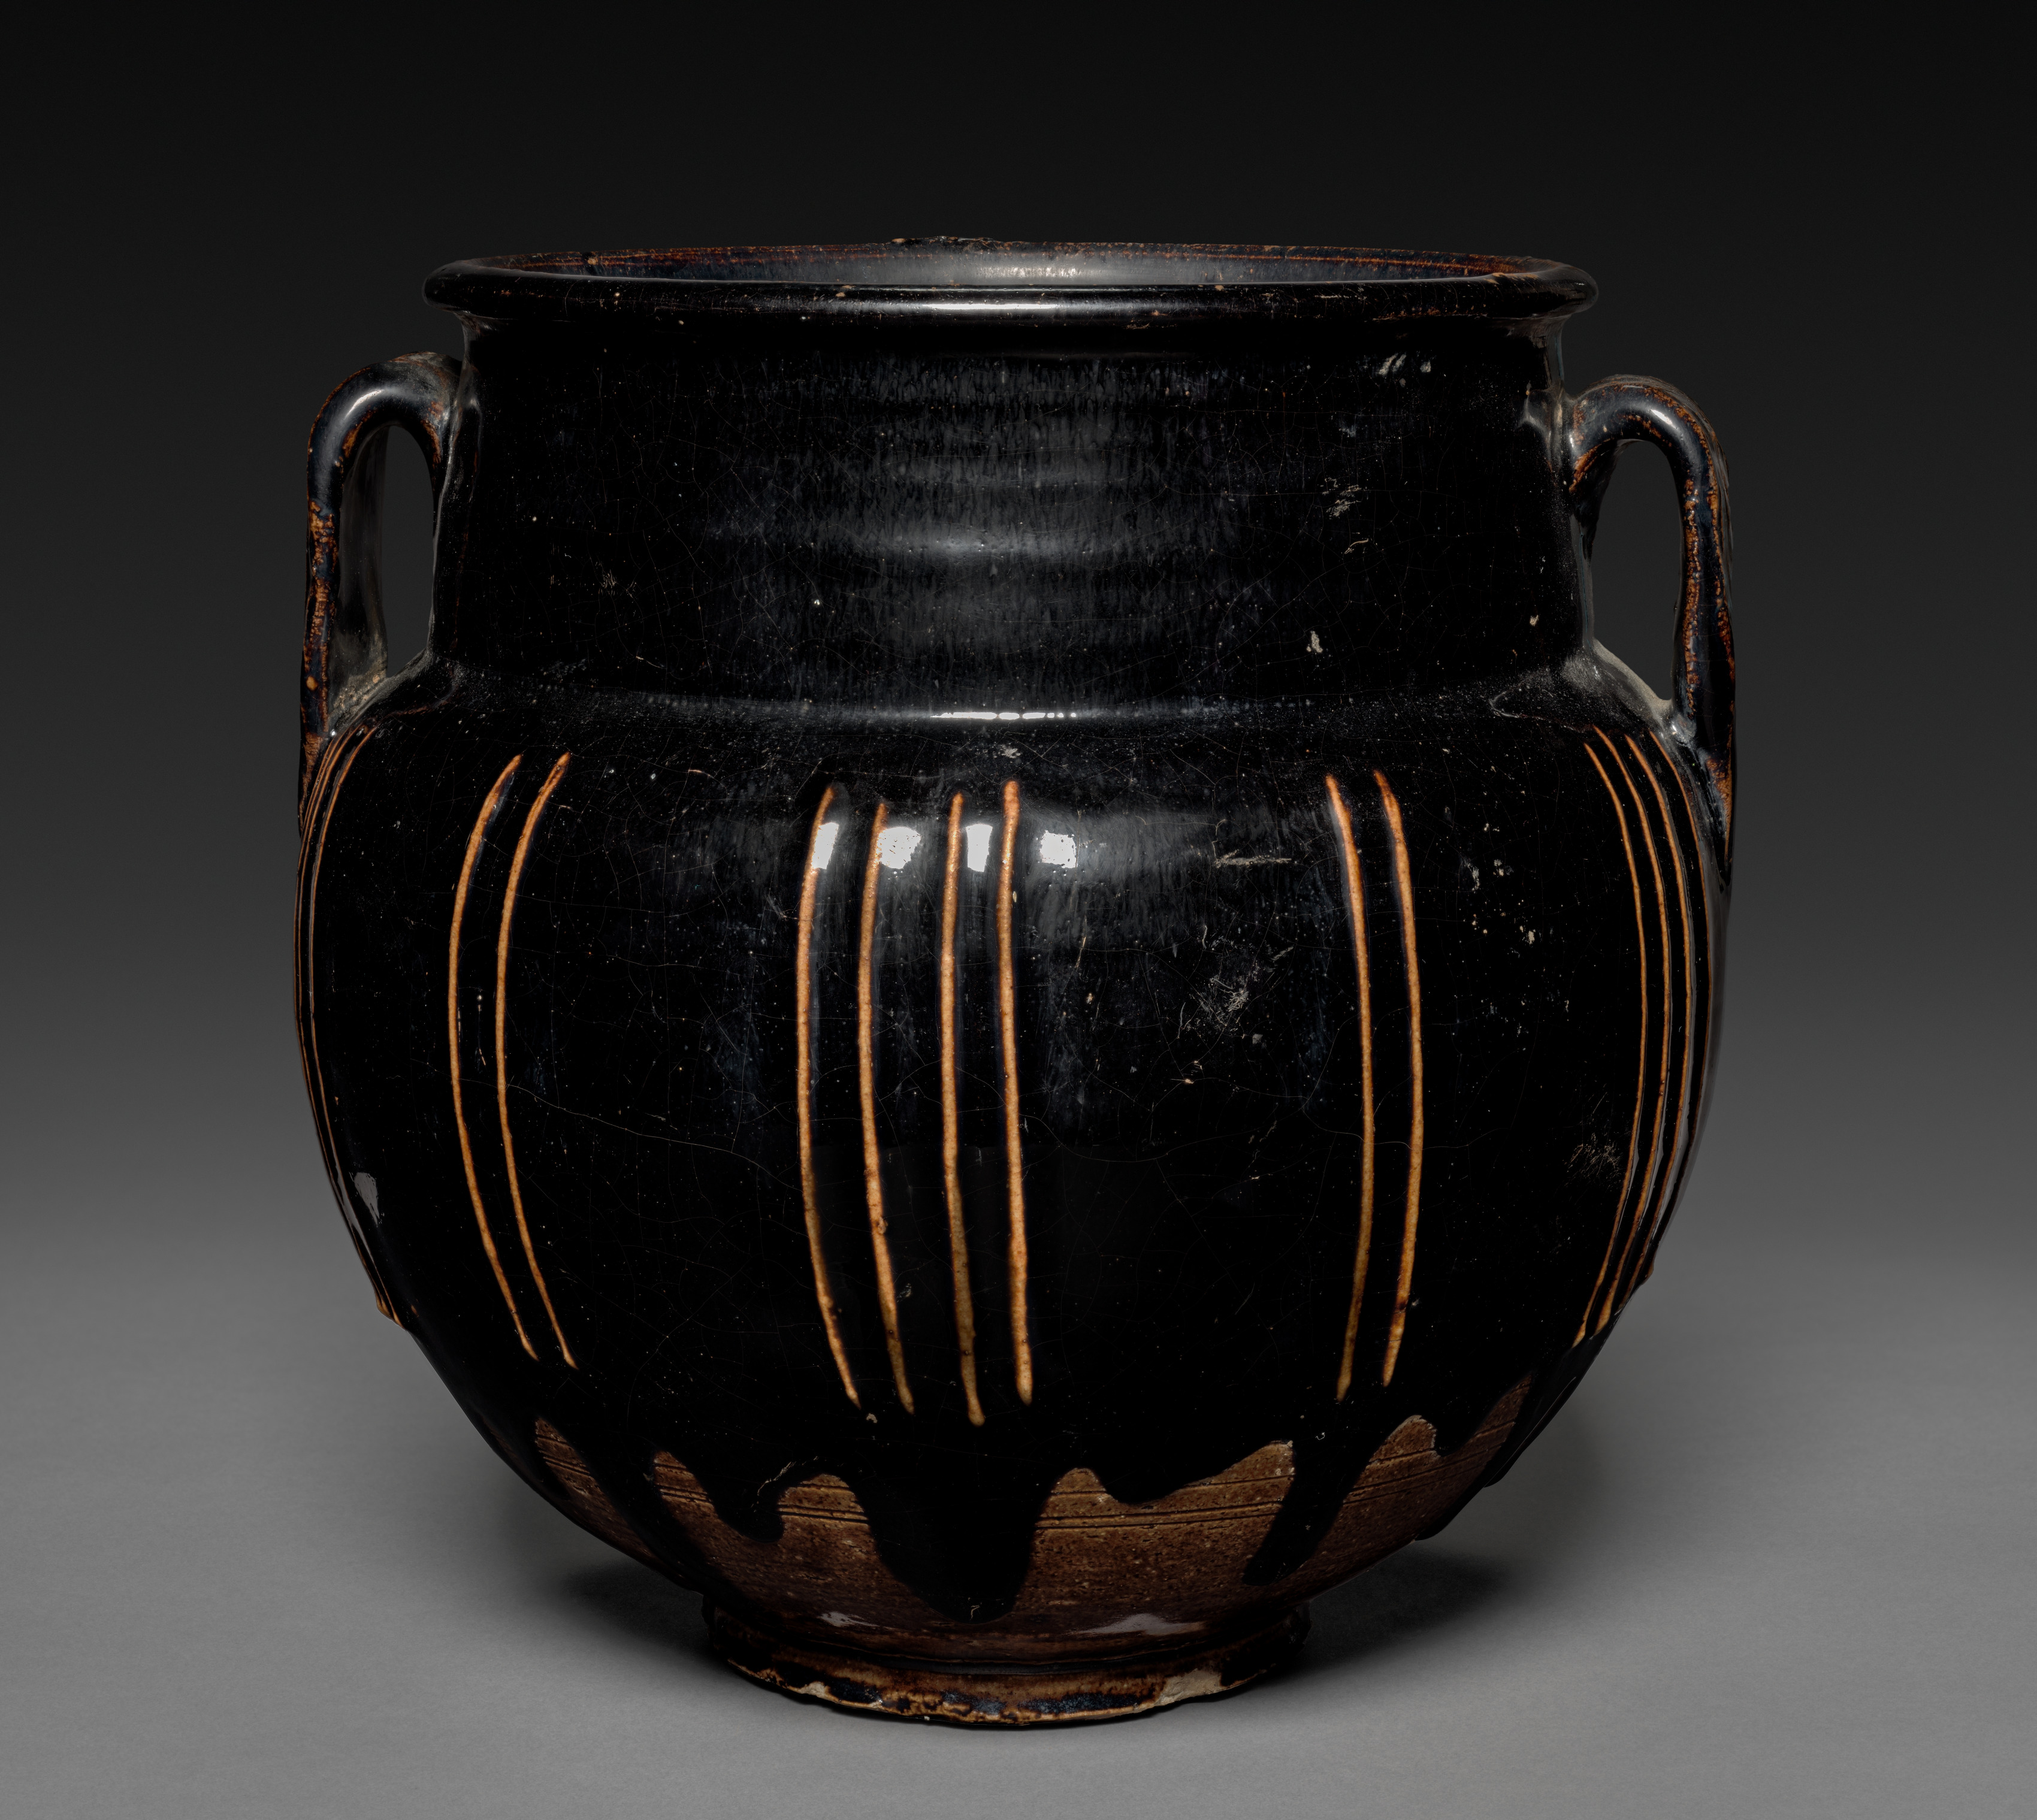 Jar with Handles and Vertical Ribs